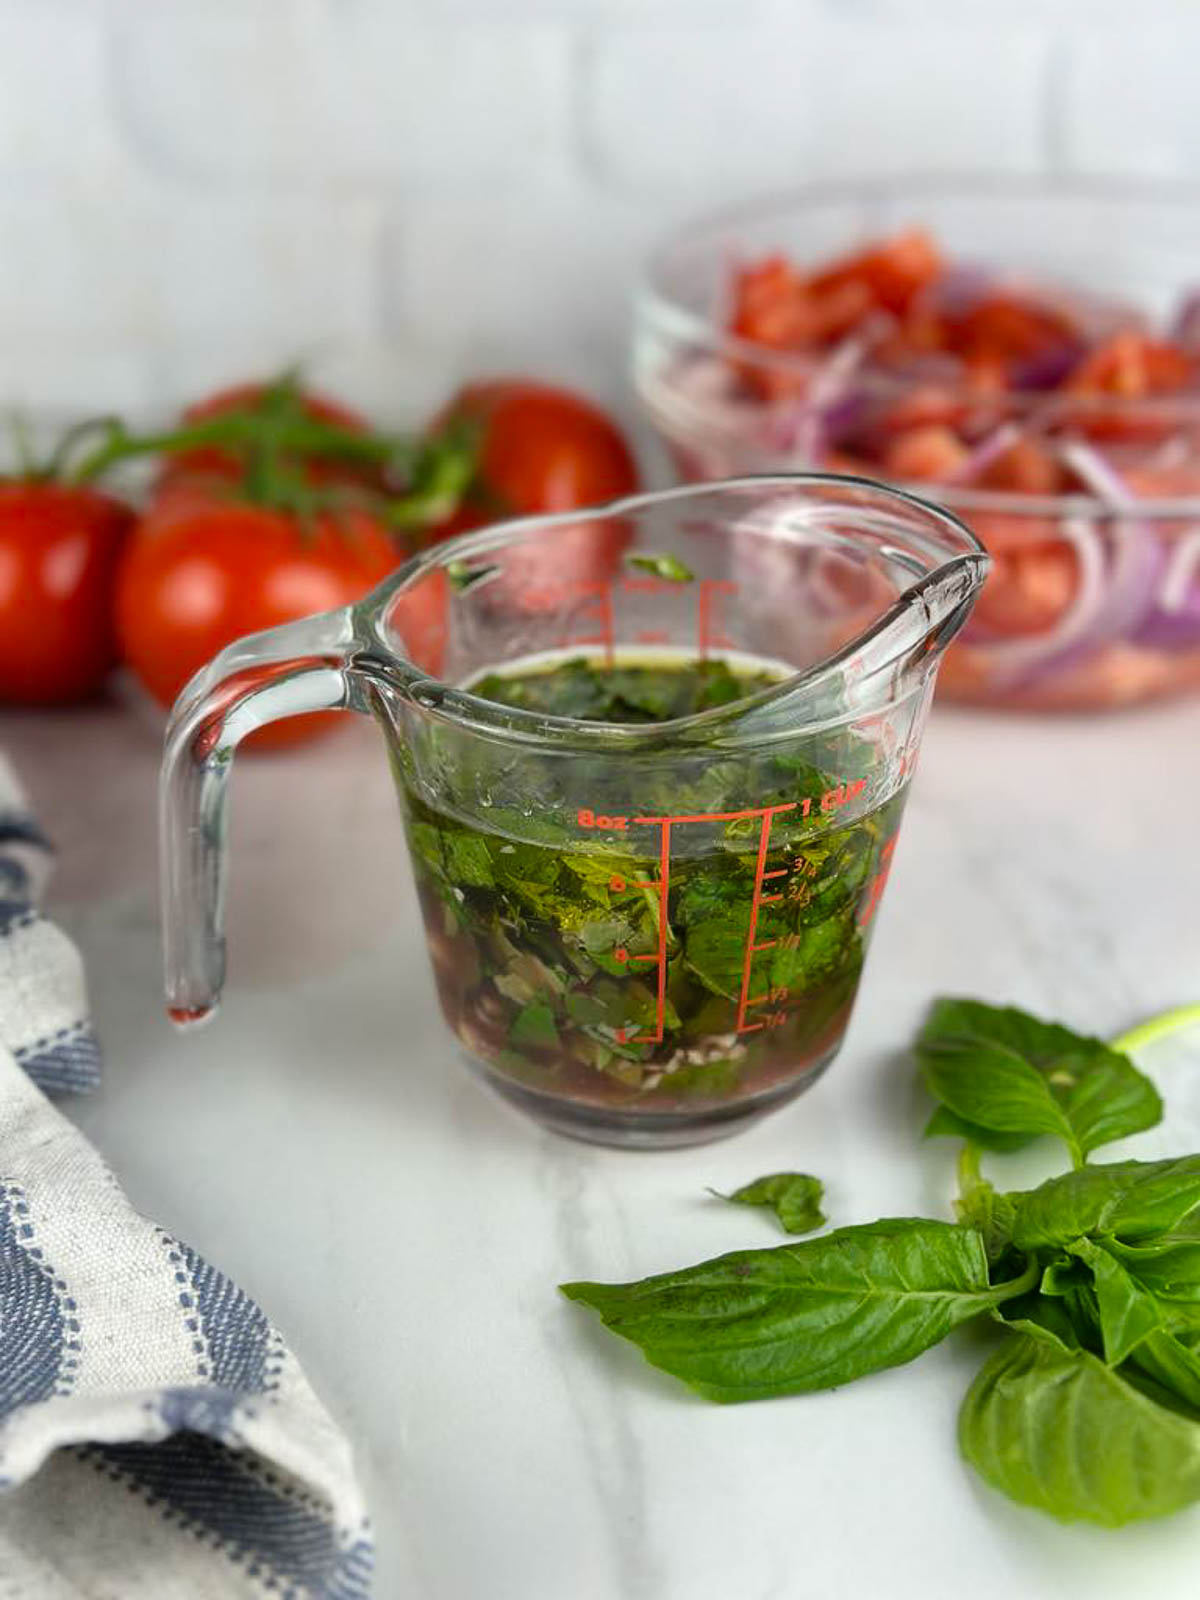 Whisk the olive oil, vinegar, garlic, and basil together to make dressing for the tomato onion salad.